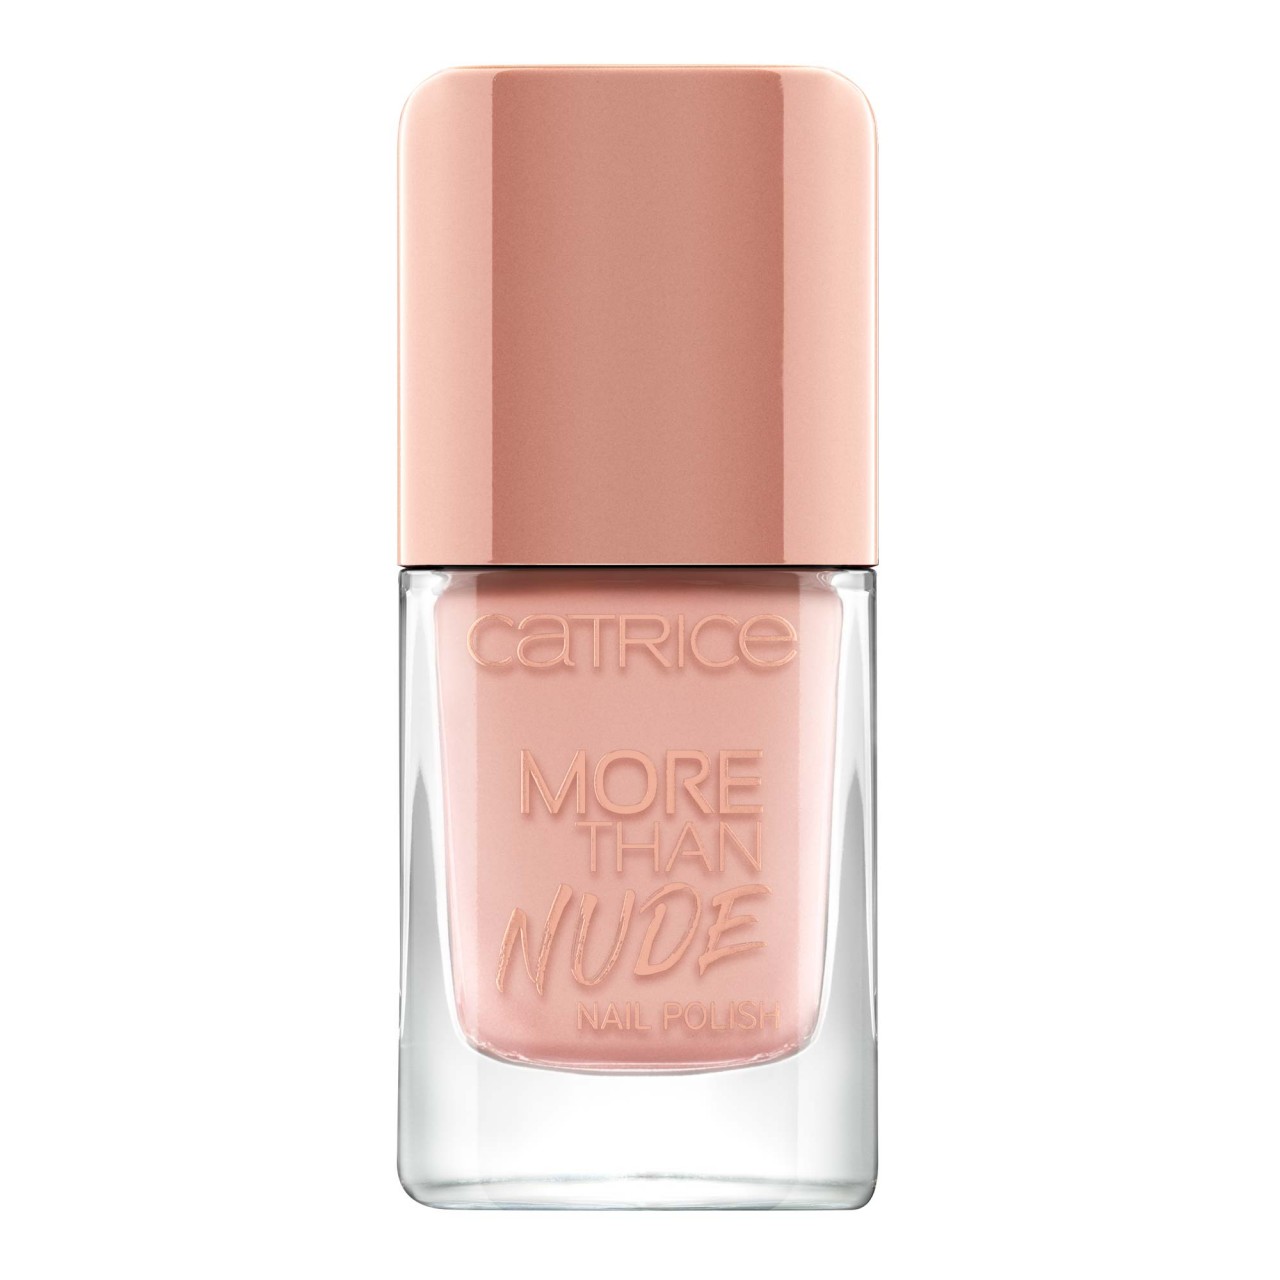 CATRICE - Nail Polish More Than Nude -  Nudle Beauty